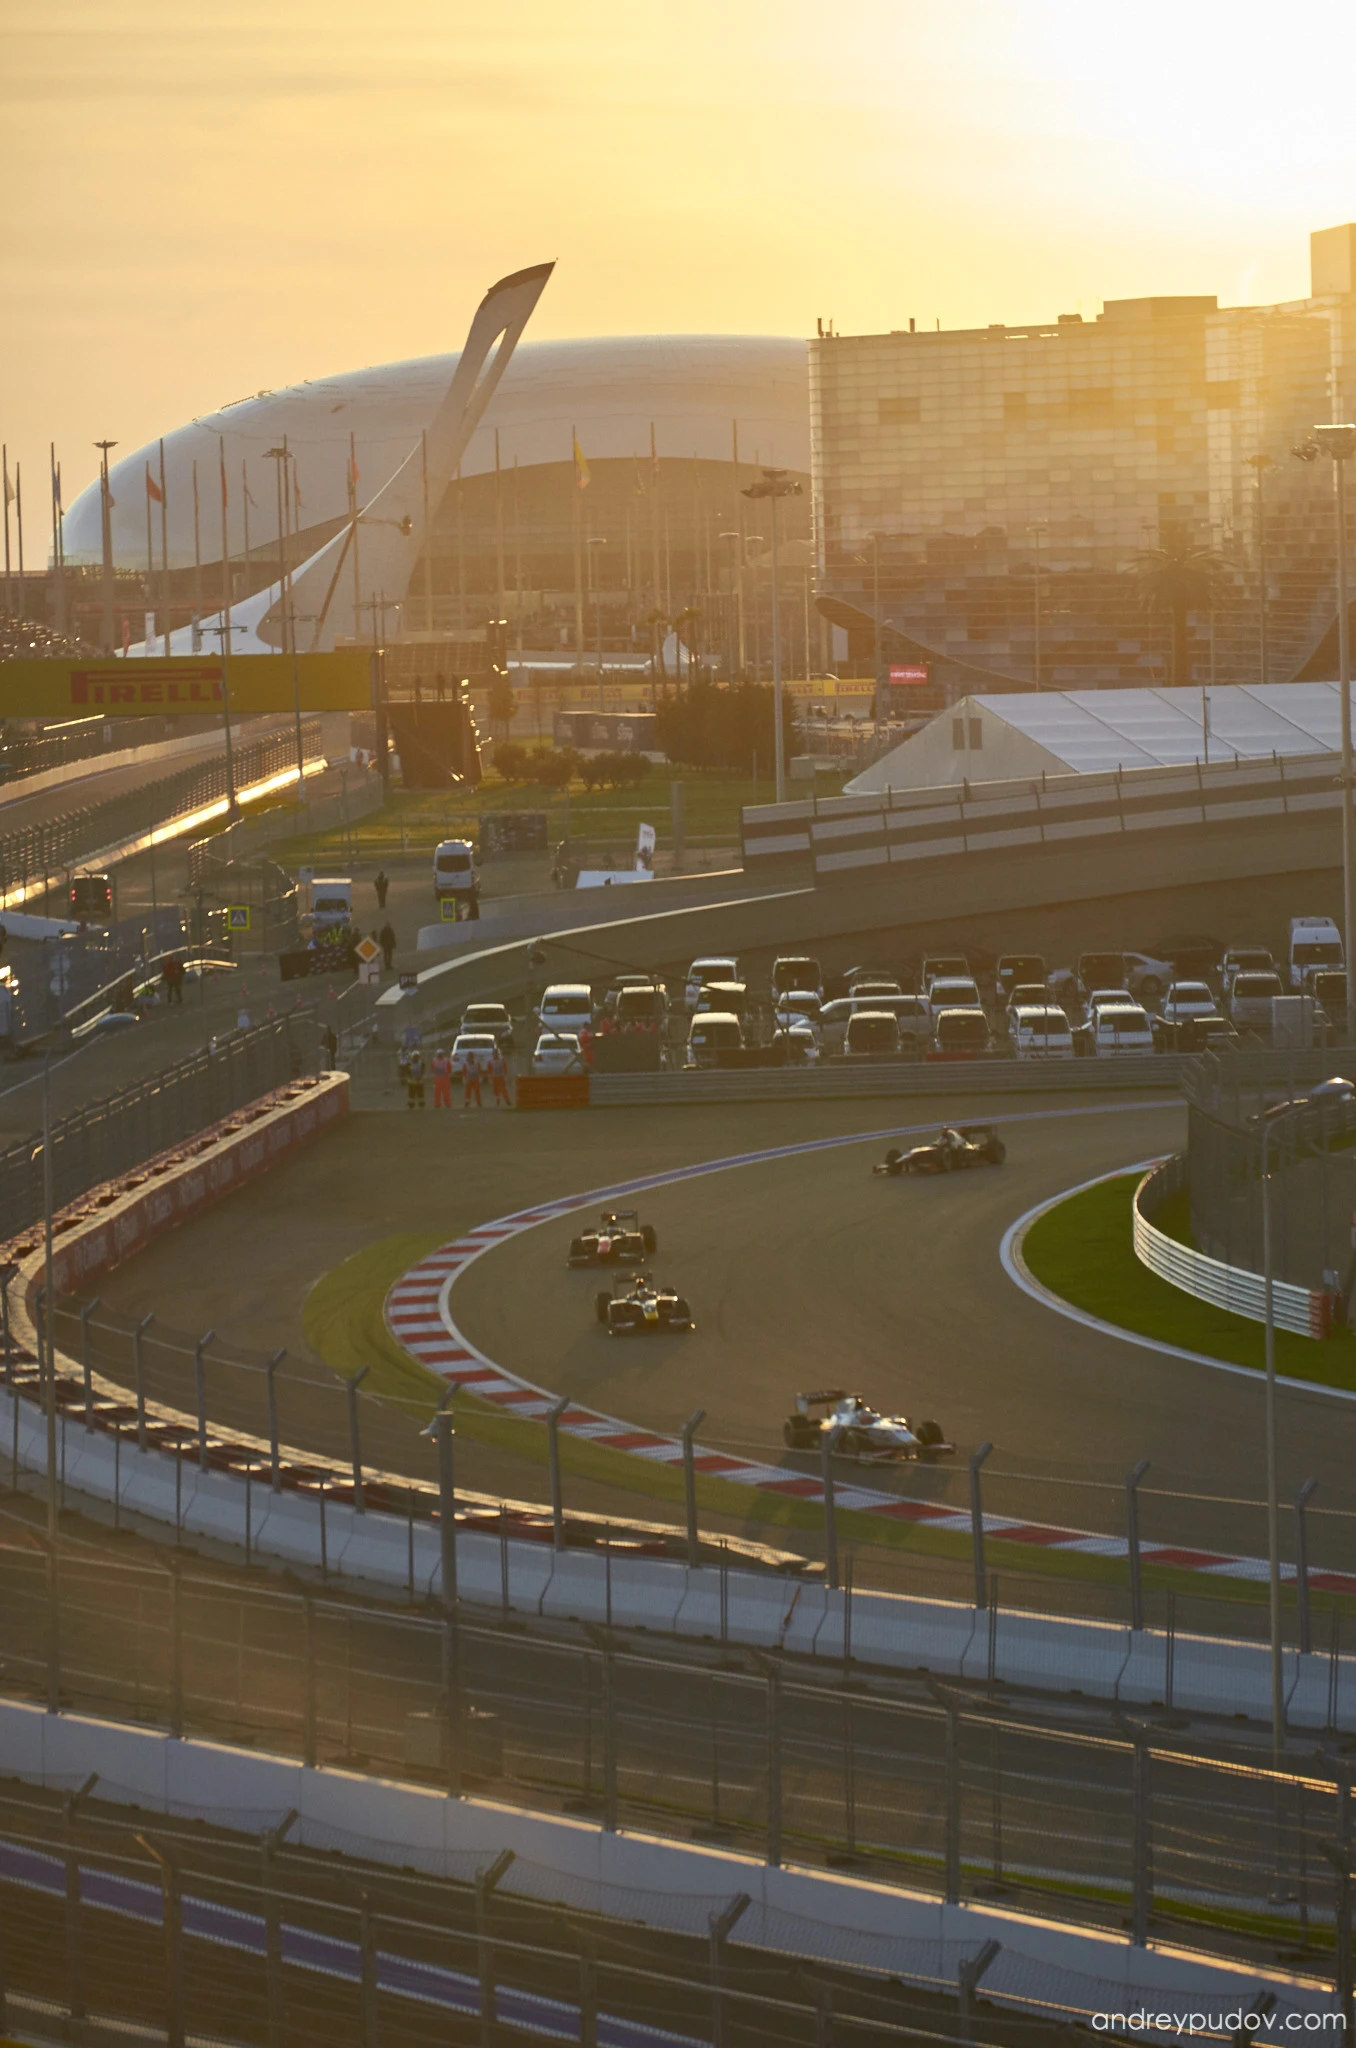 The first race of GP2 series.